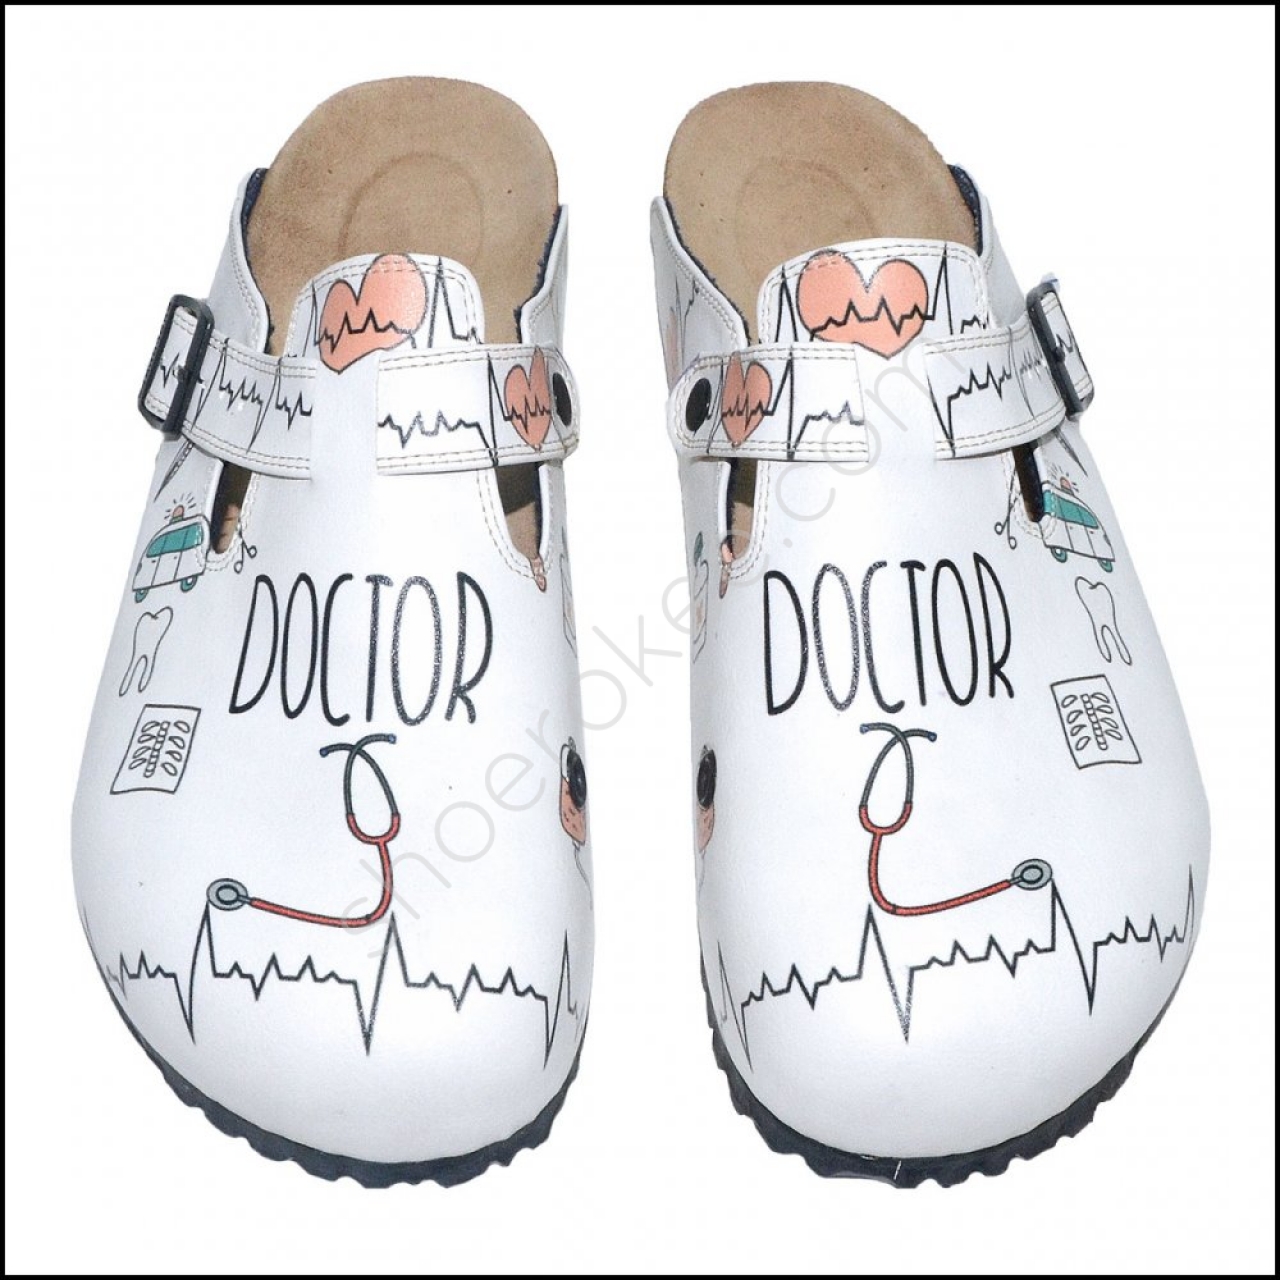 DOCTOR_2